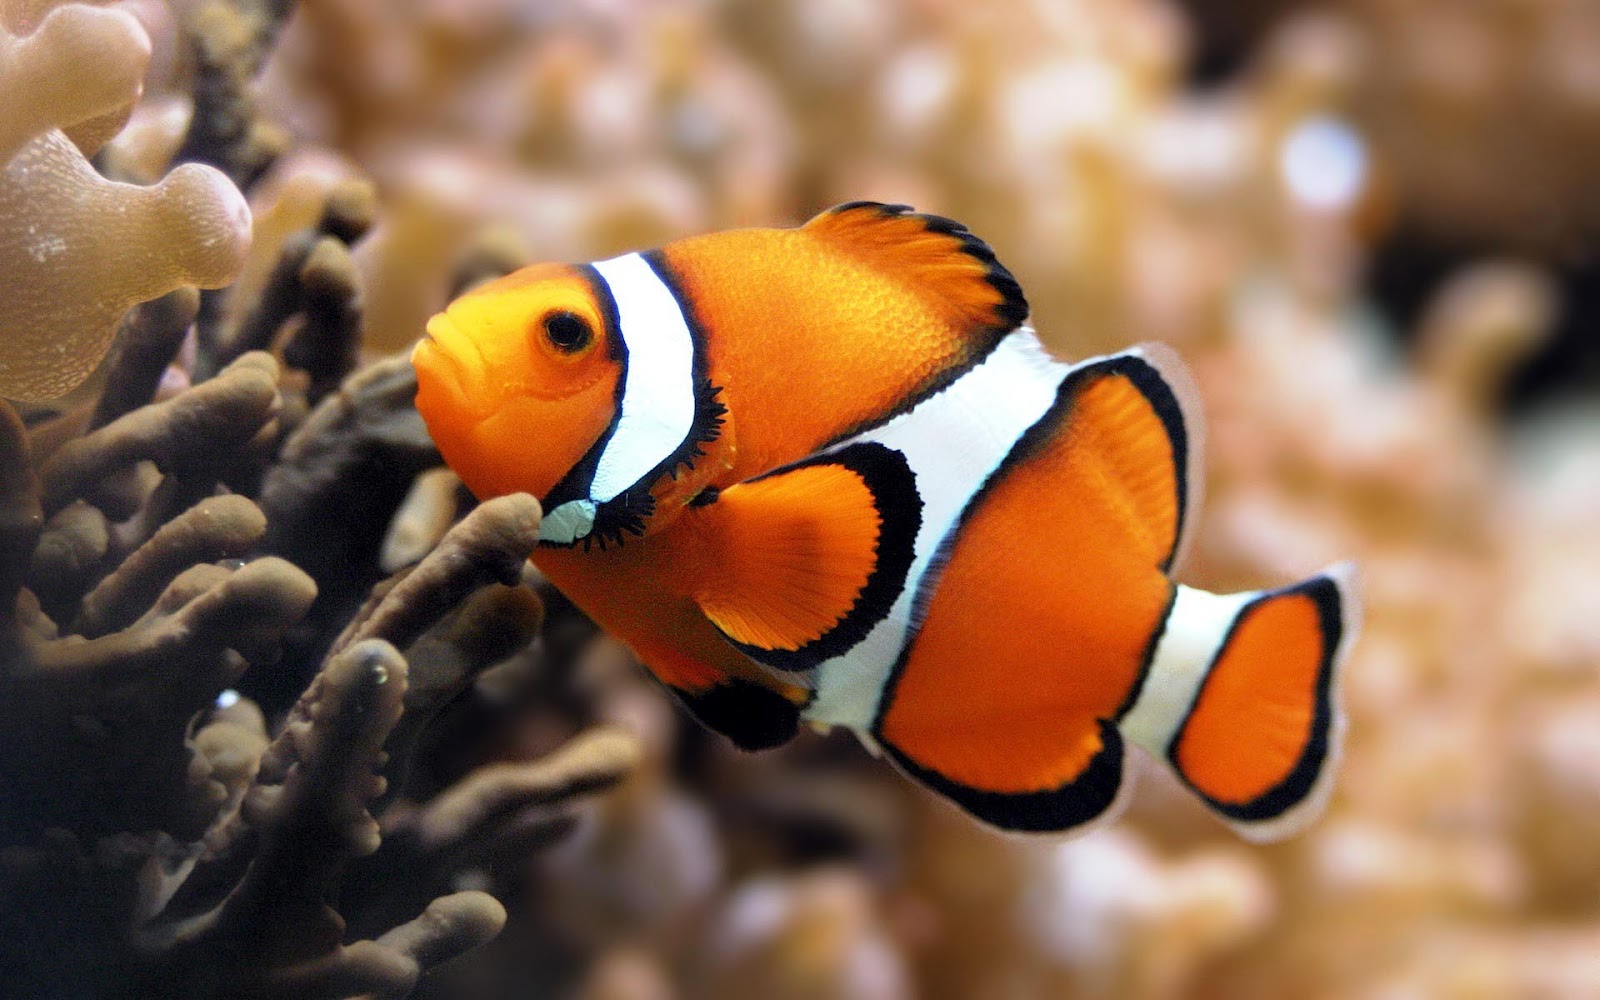 HD Fish Wallpaper With A Orange Tropical